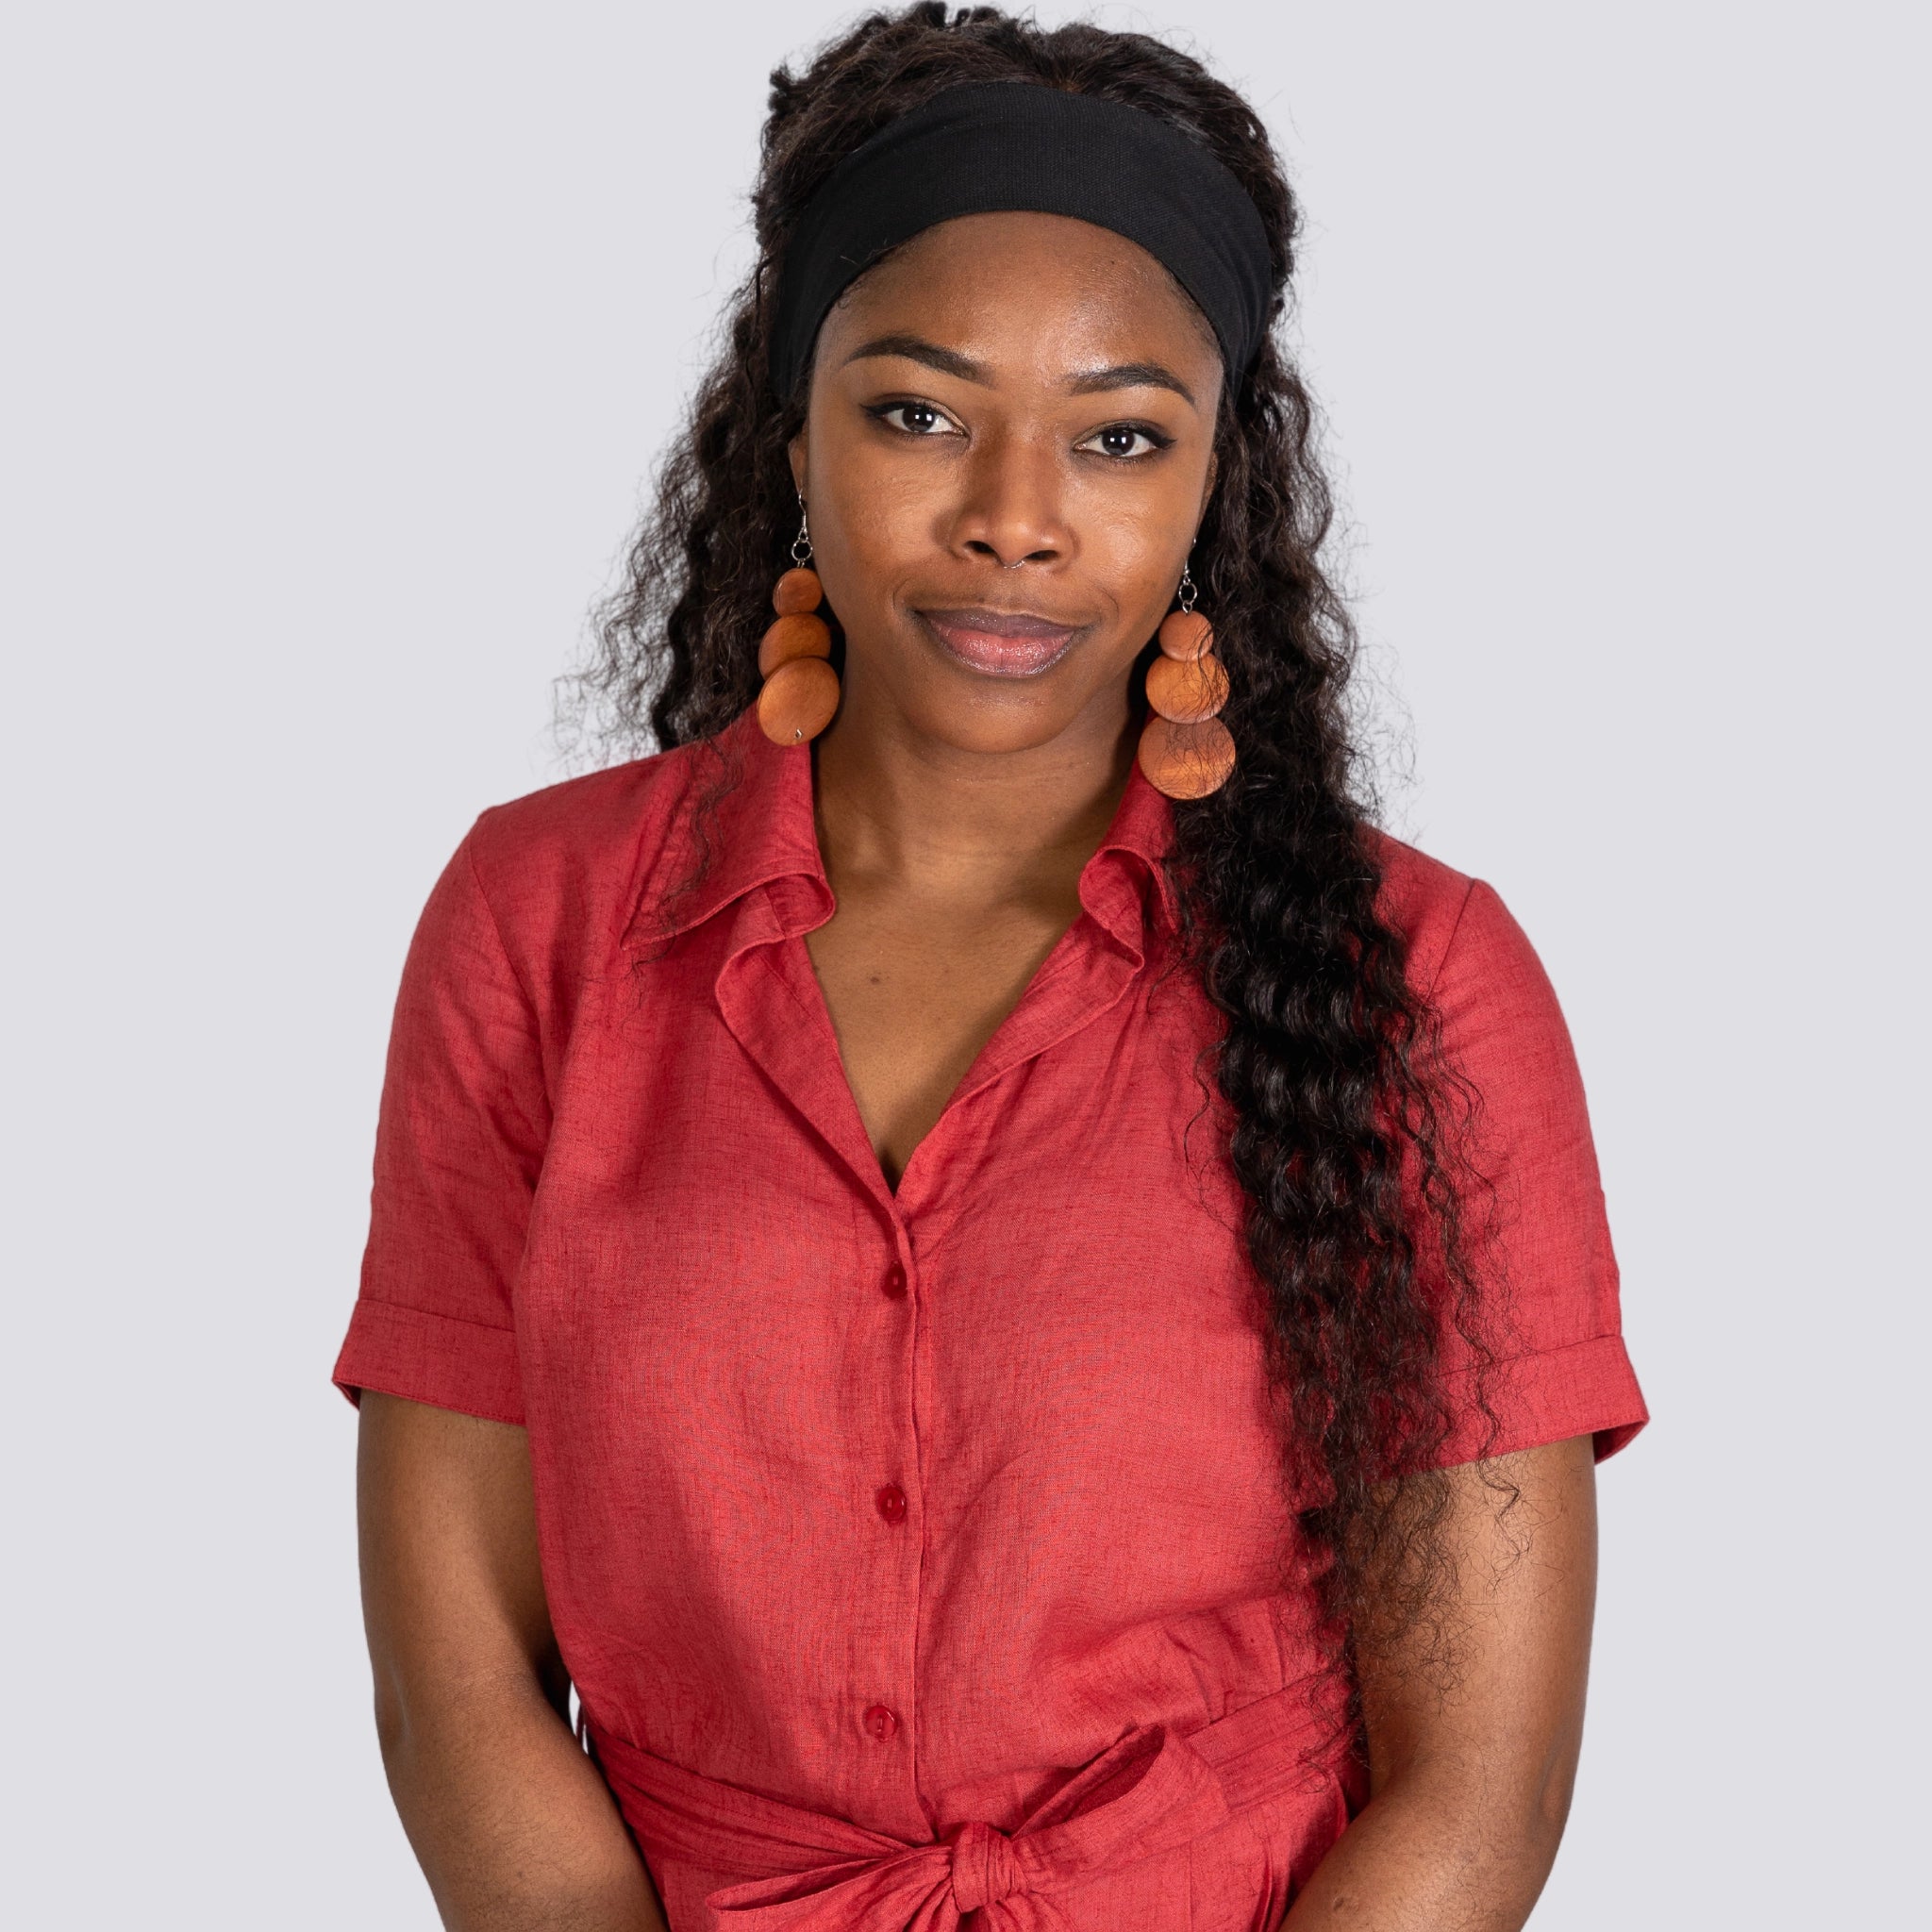 A woman in a Karee Milano Red Serenity Viscose Linen Jumpsuit and black headband, wearing round wooden earrings, looks directly at the camera with a neutral expression.